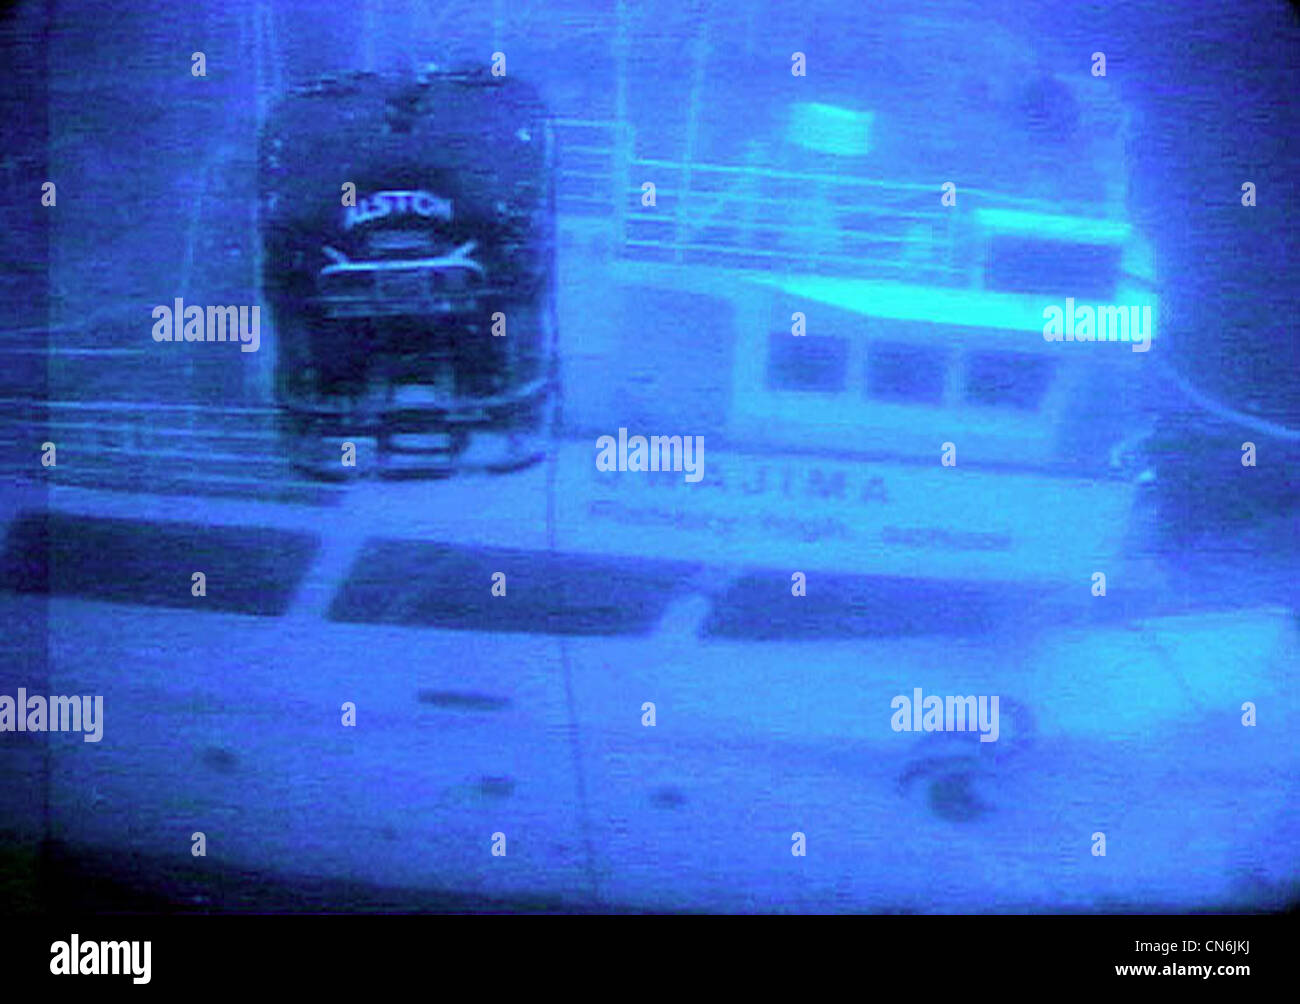 Underwater shot of the Remotely Operated Vehicles (ROV) TXL-16, assisting with salvage, during the recovery operations for the Japanese fishing vessel Ehime Maru. Stock Photo